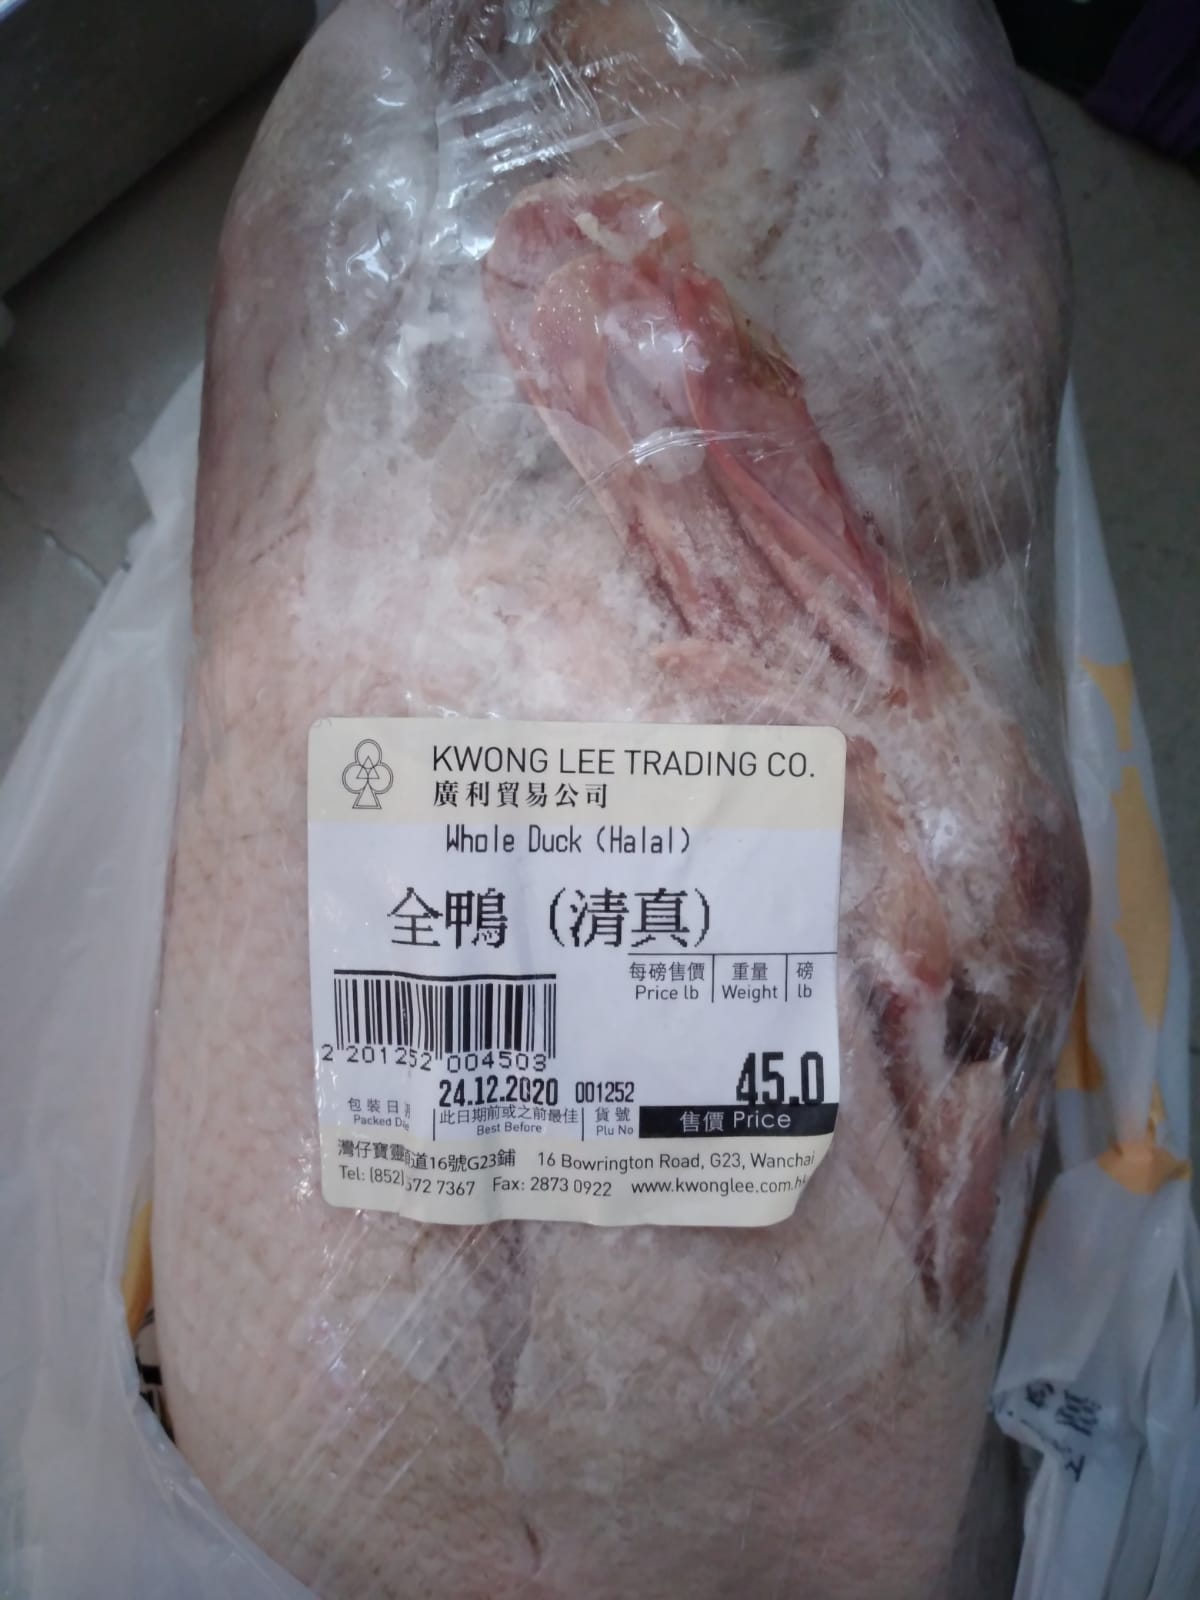 Halal duck meat is available at the KWONG LEE shop.